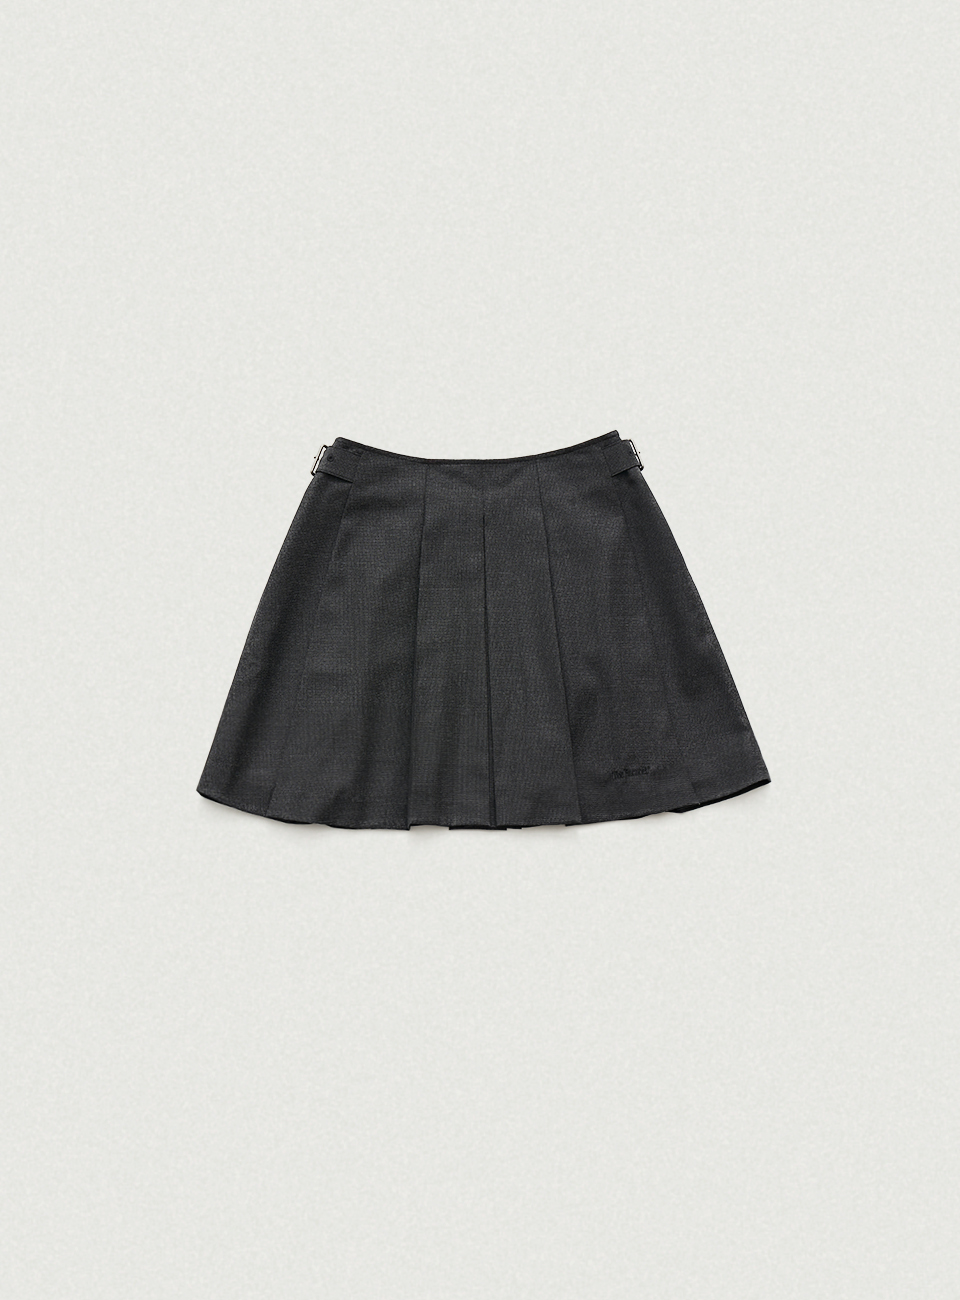 Noise Check Pleated Skirt